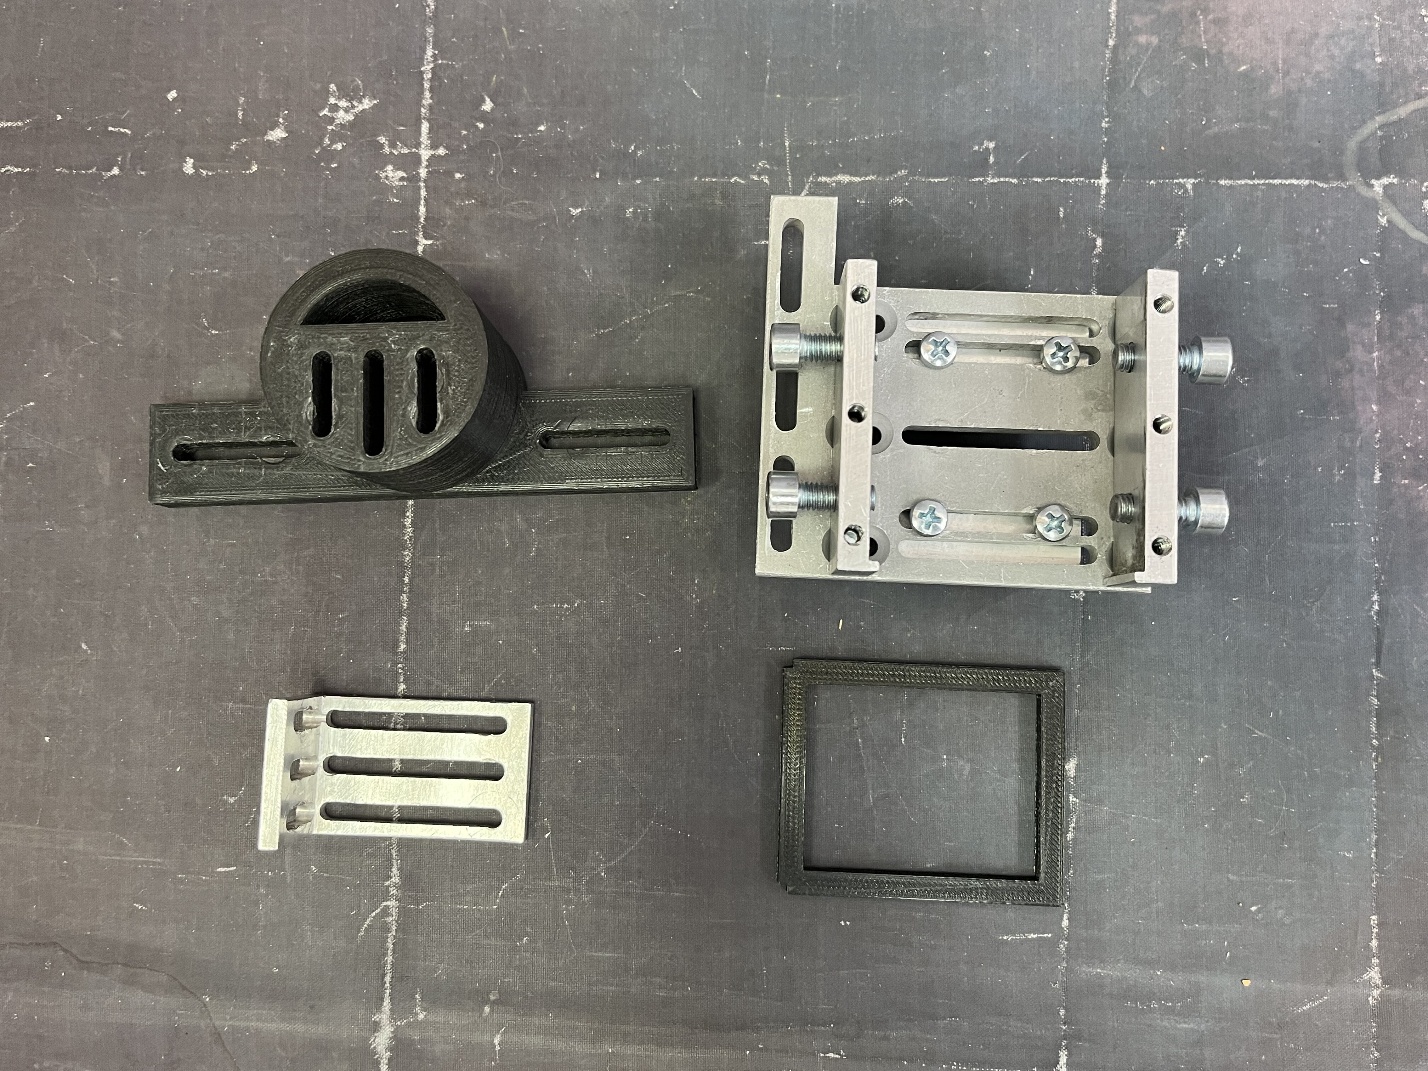 Figure 3 - Parts for assembling the mount